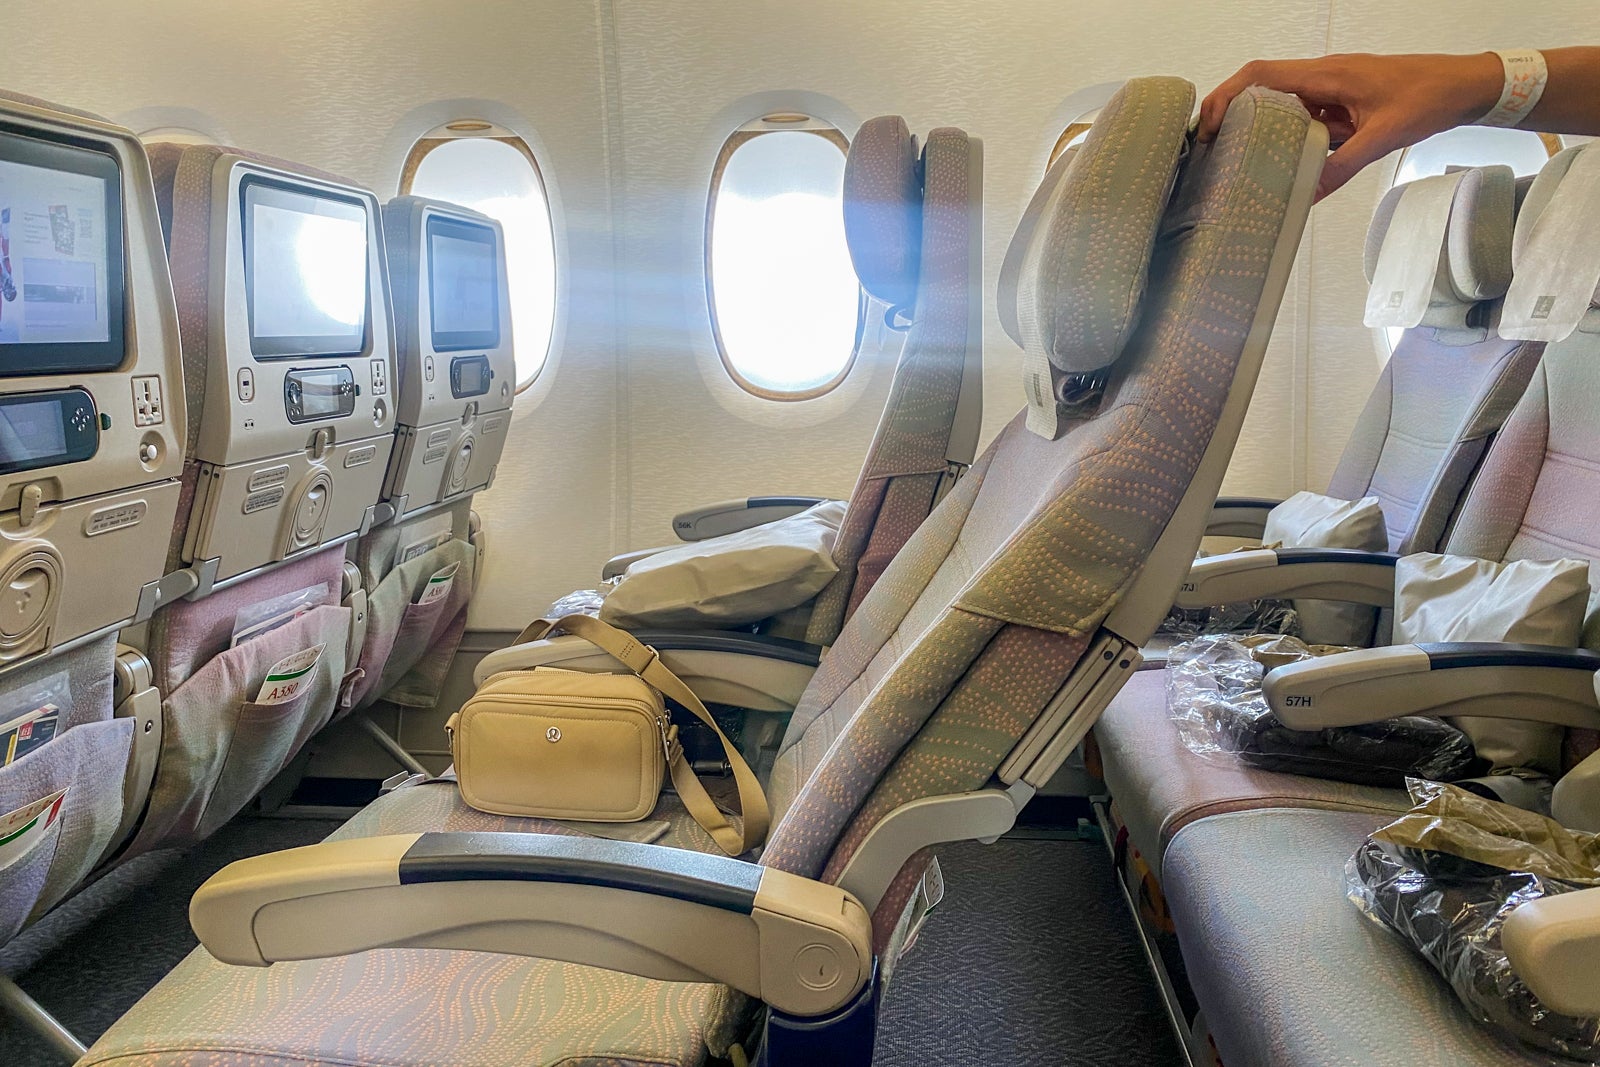 Review of Emirates economy cabin on an A380 from Dubai to Johannesburg -  The Points Guy